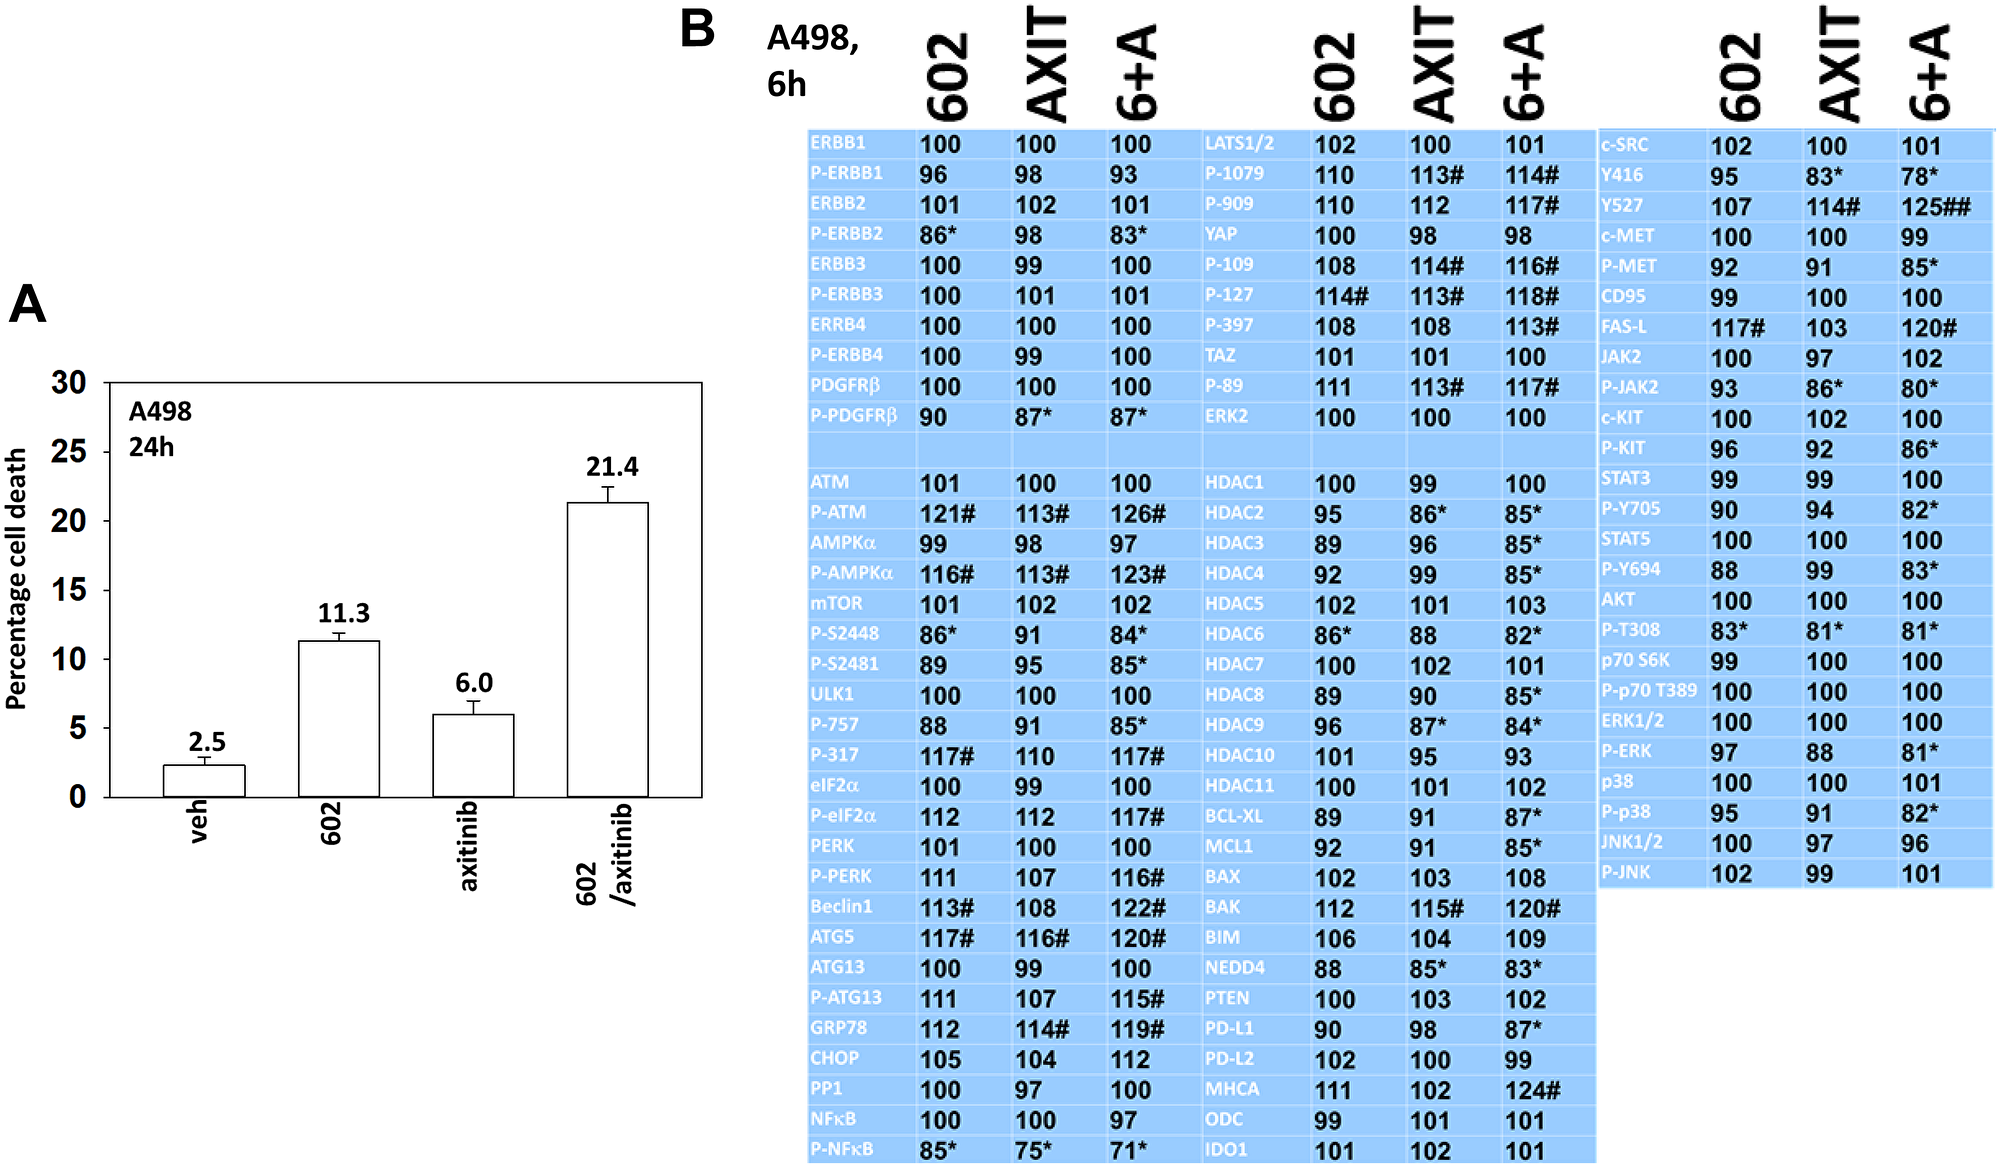 GZ17-6.02 and axitinib regulate protein expression and protein phosphorylation in A498 RCCs.